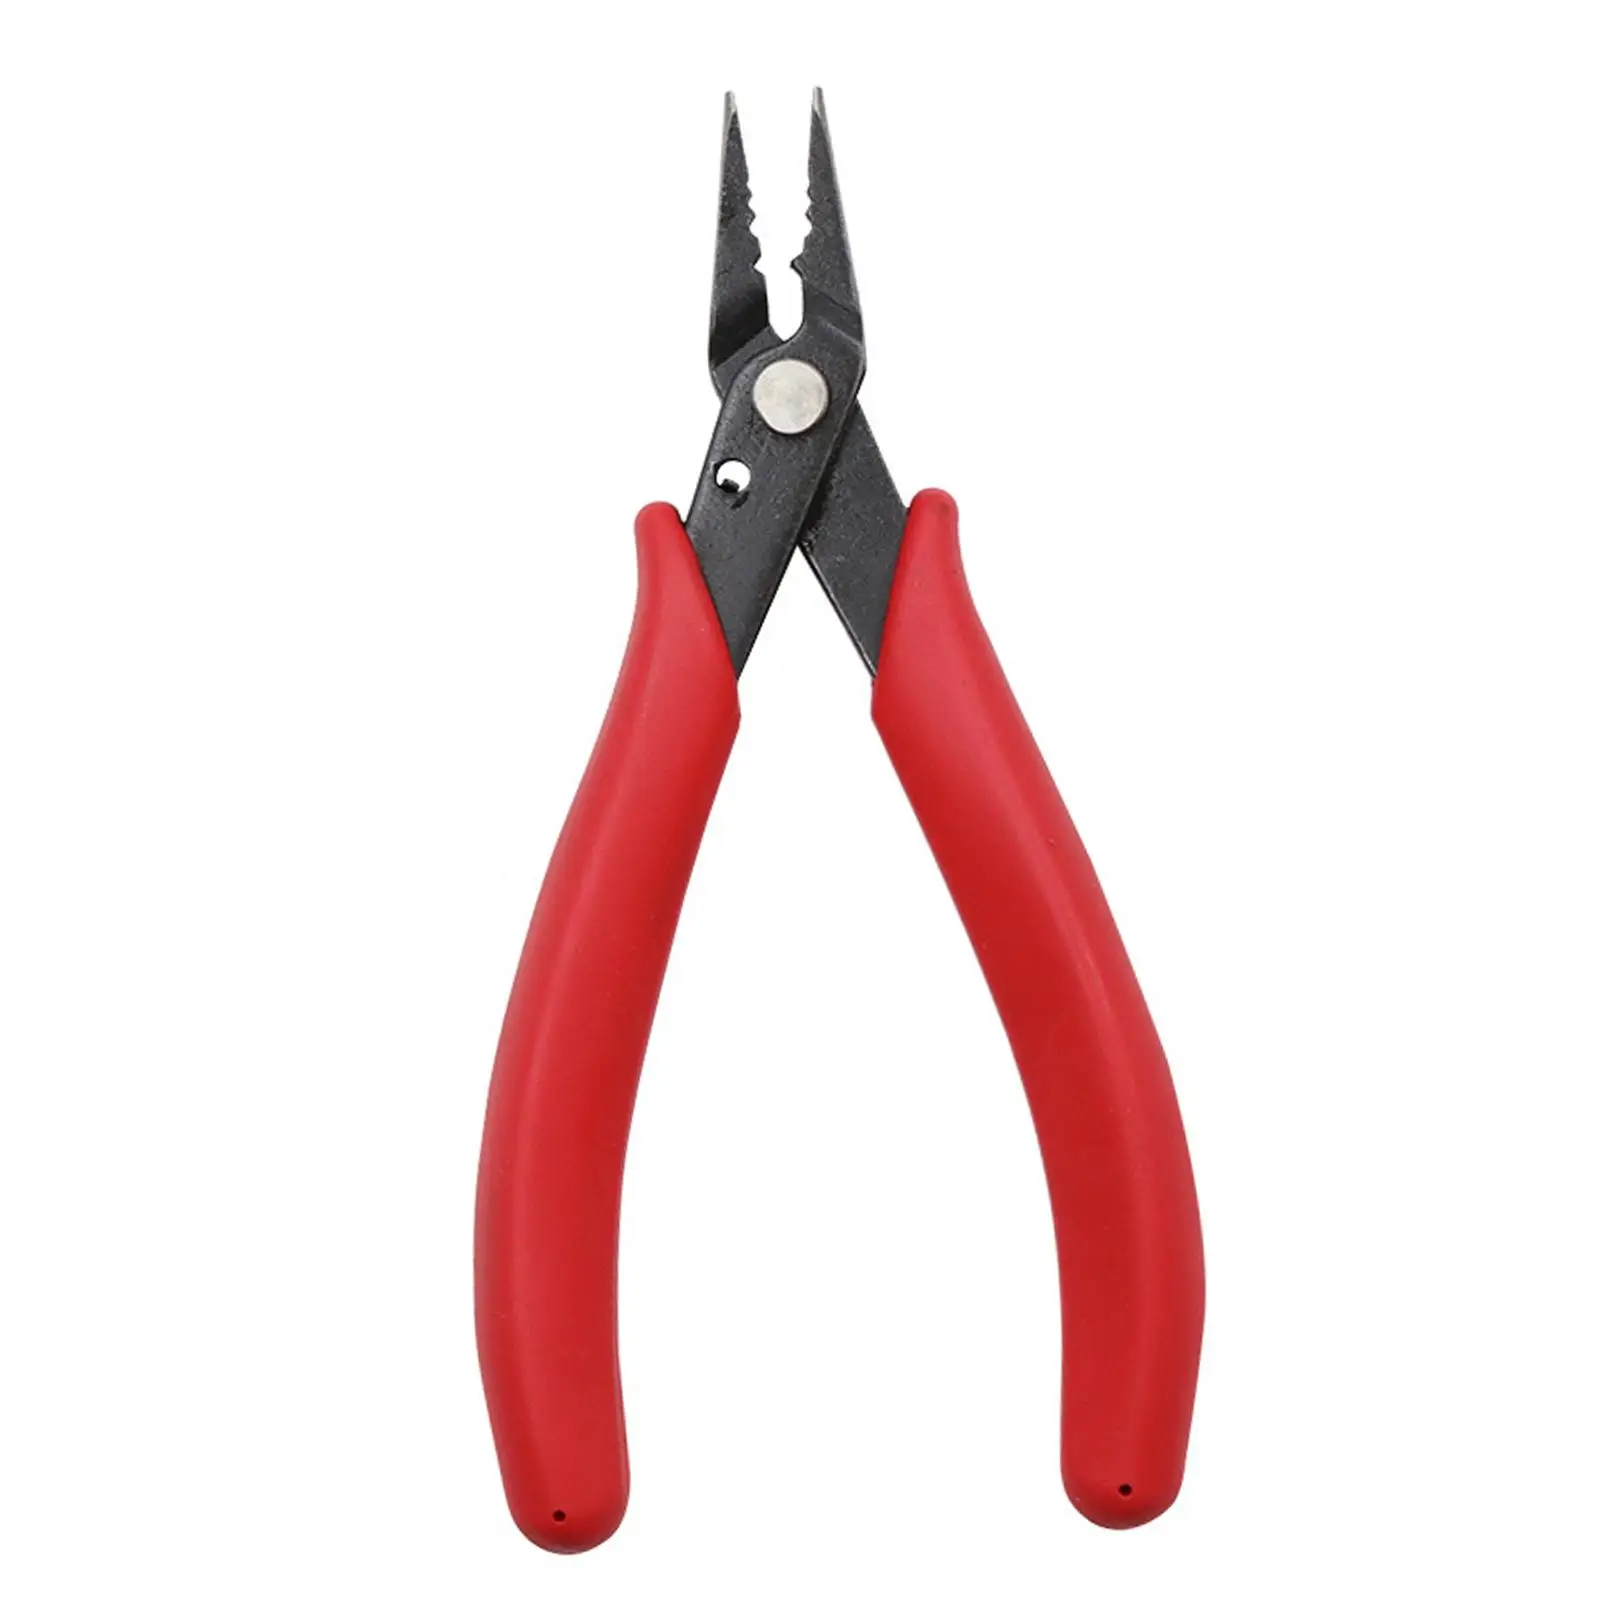 

Bead Crimping Pliers Jewelry Making Tools Wire 14cm Craft Repair Supplies Cutting Pliers for Wrapping Beading Necklace